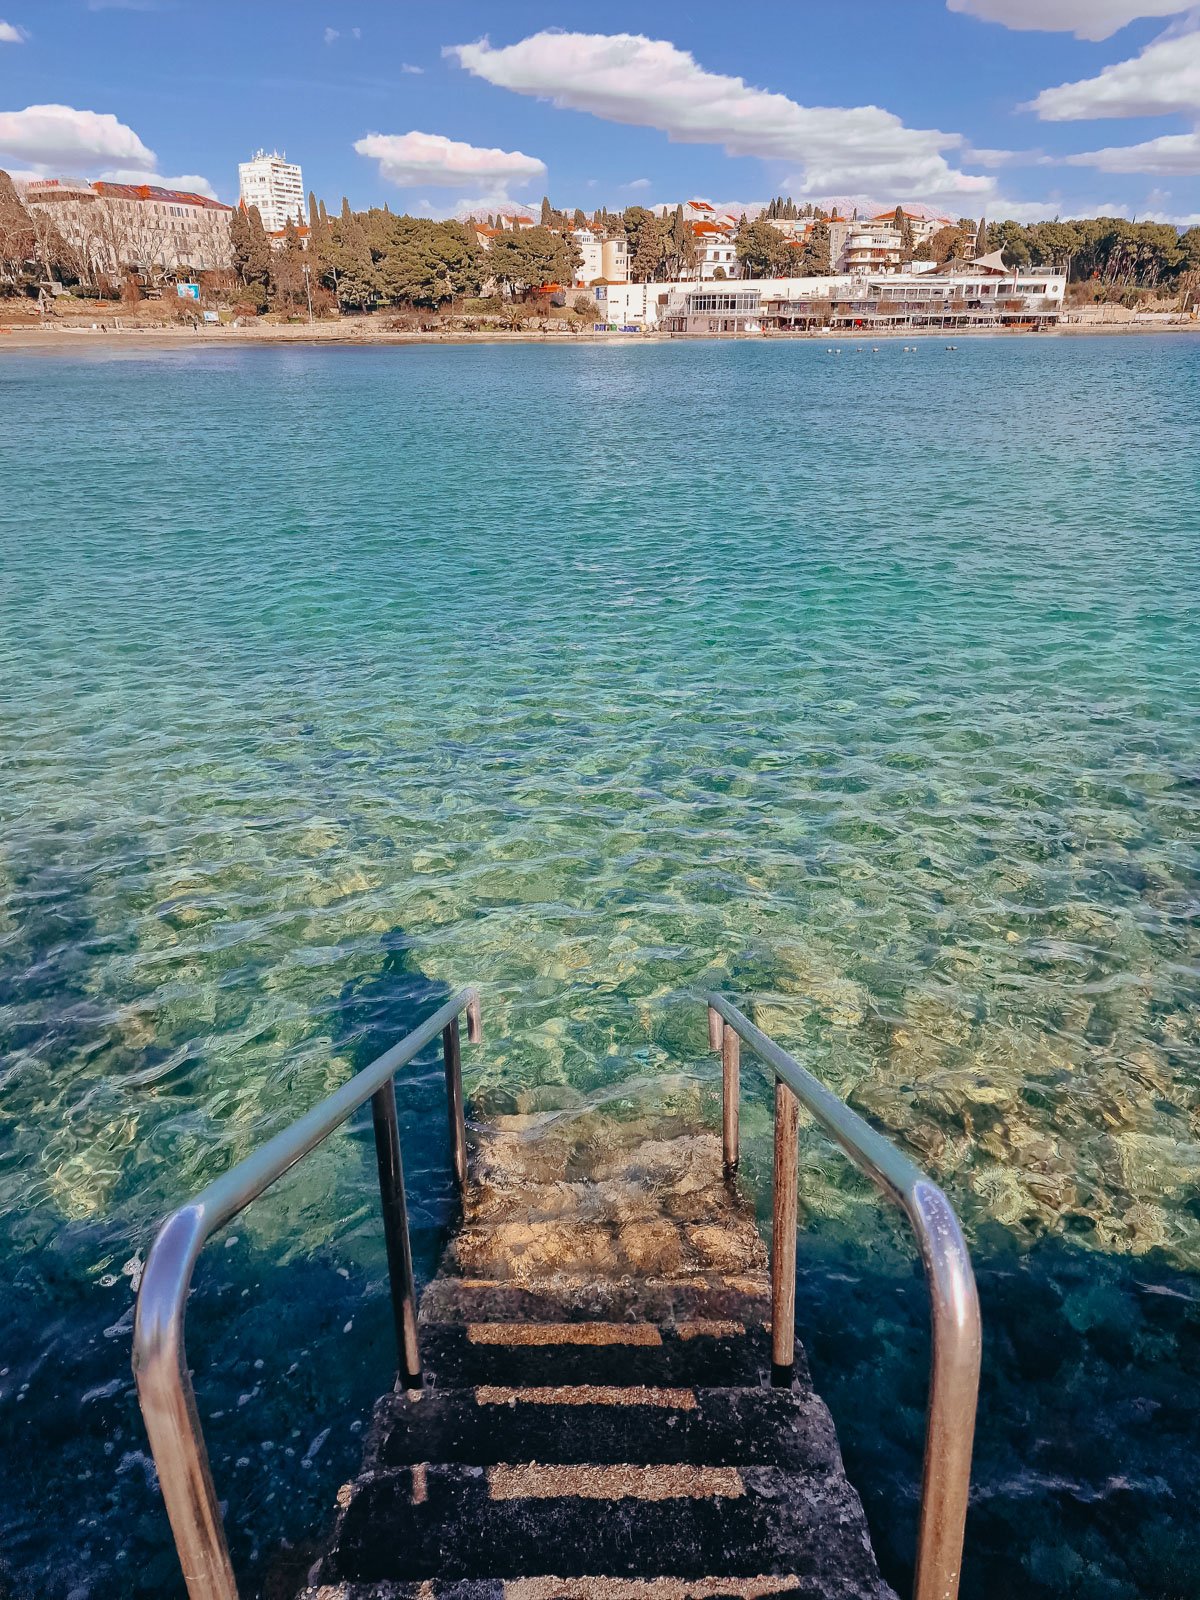 Metal steps into a calm turquoise blue bay of water